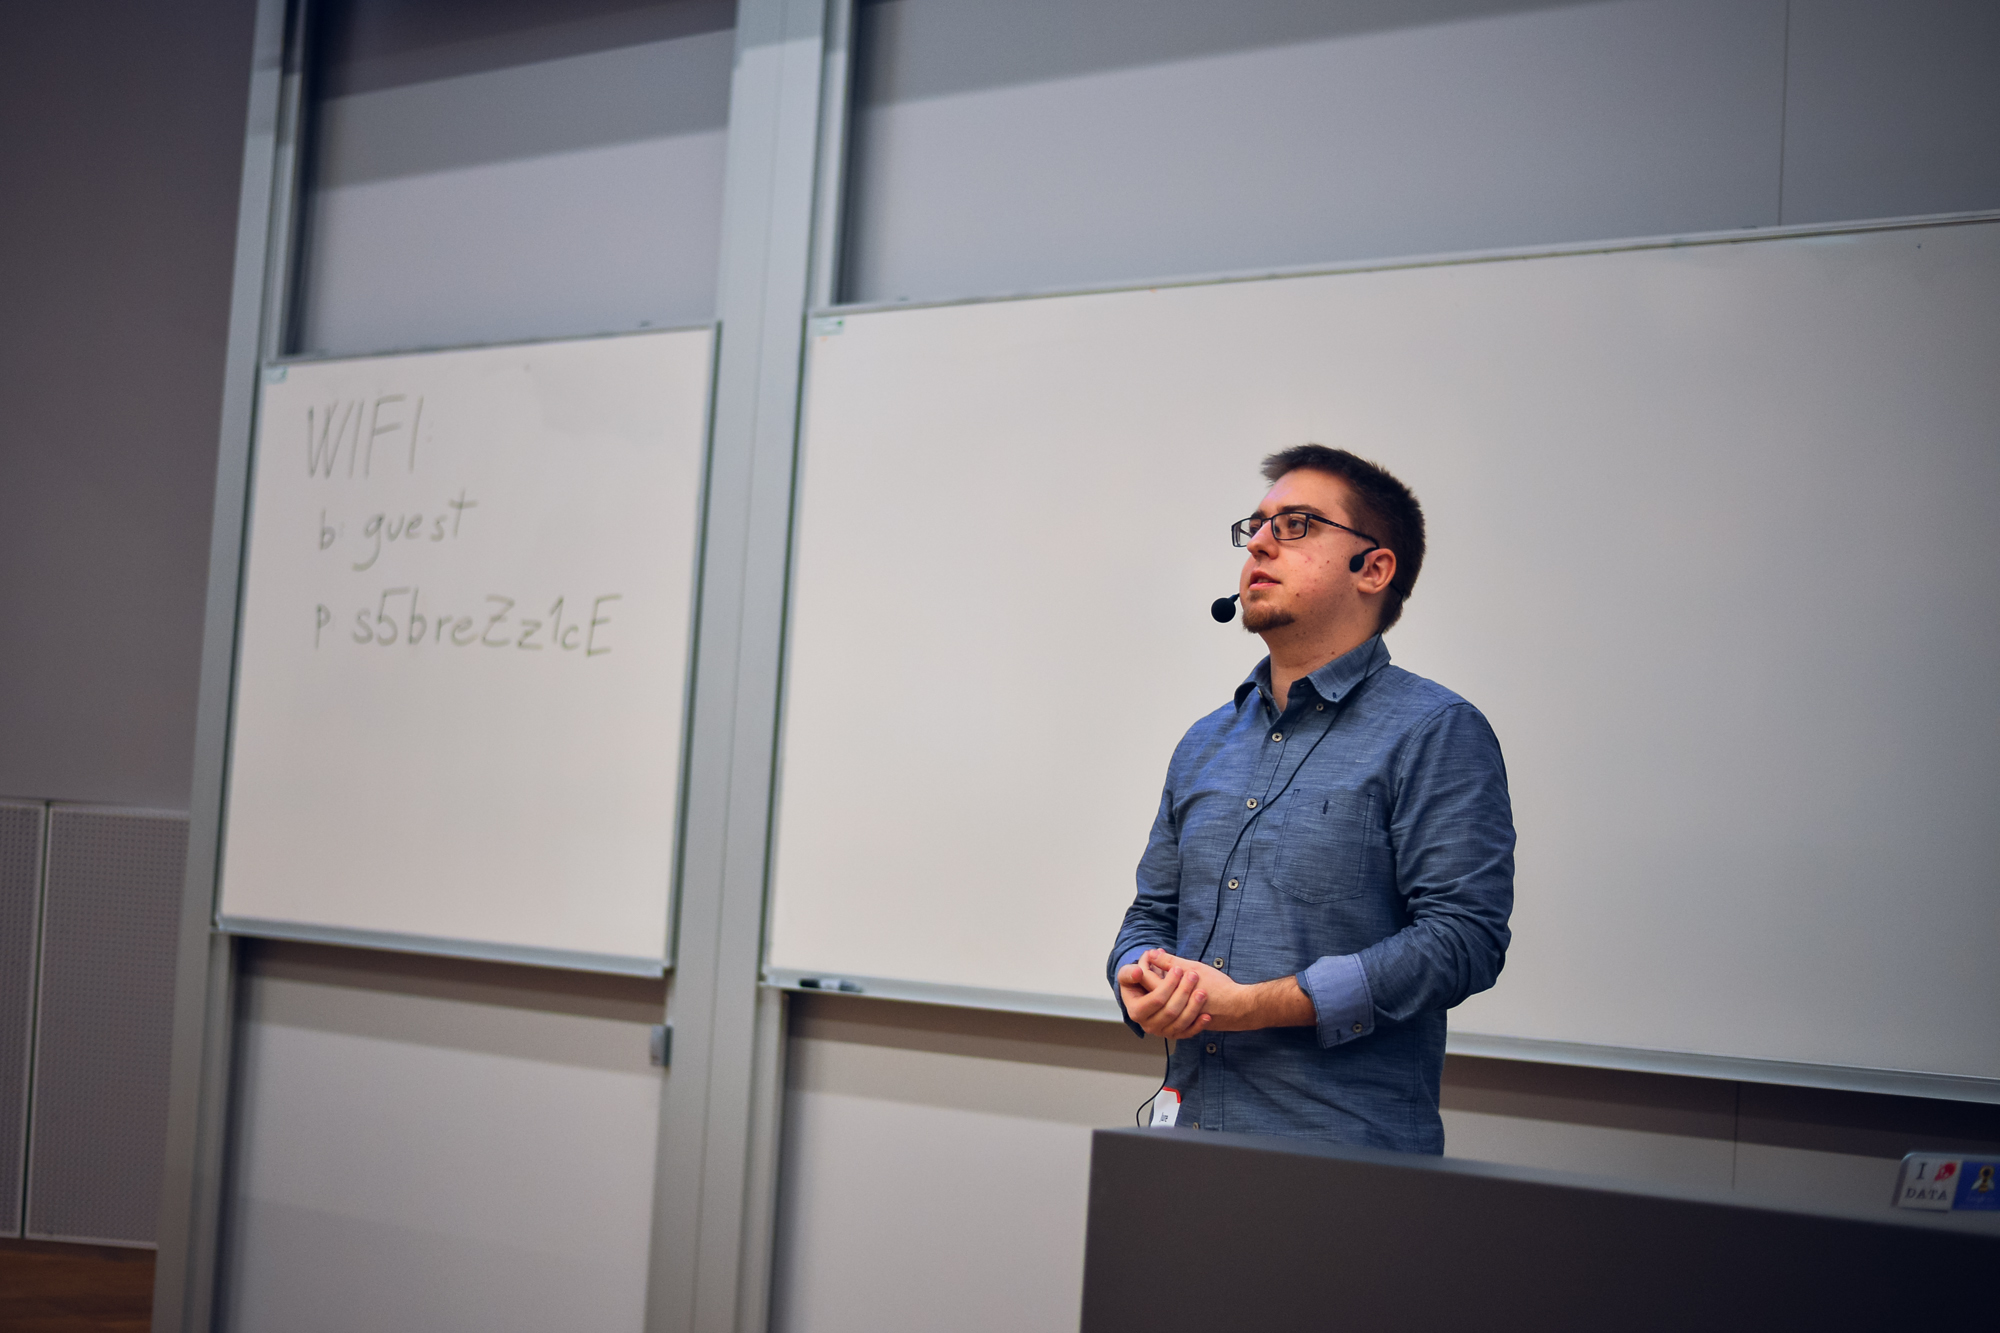 a man standing in front of a whiteboard giving a presentation